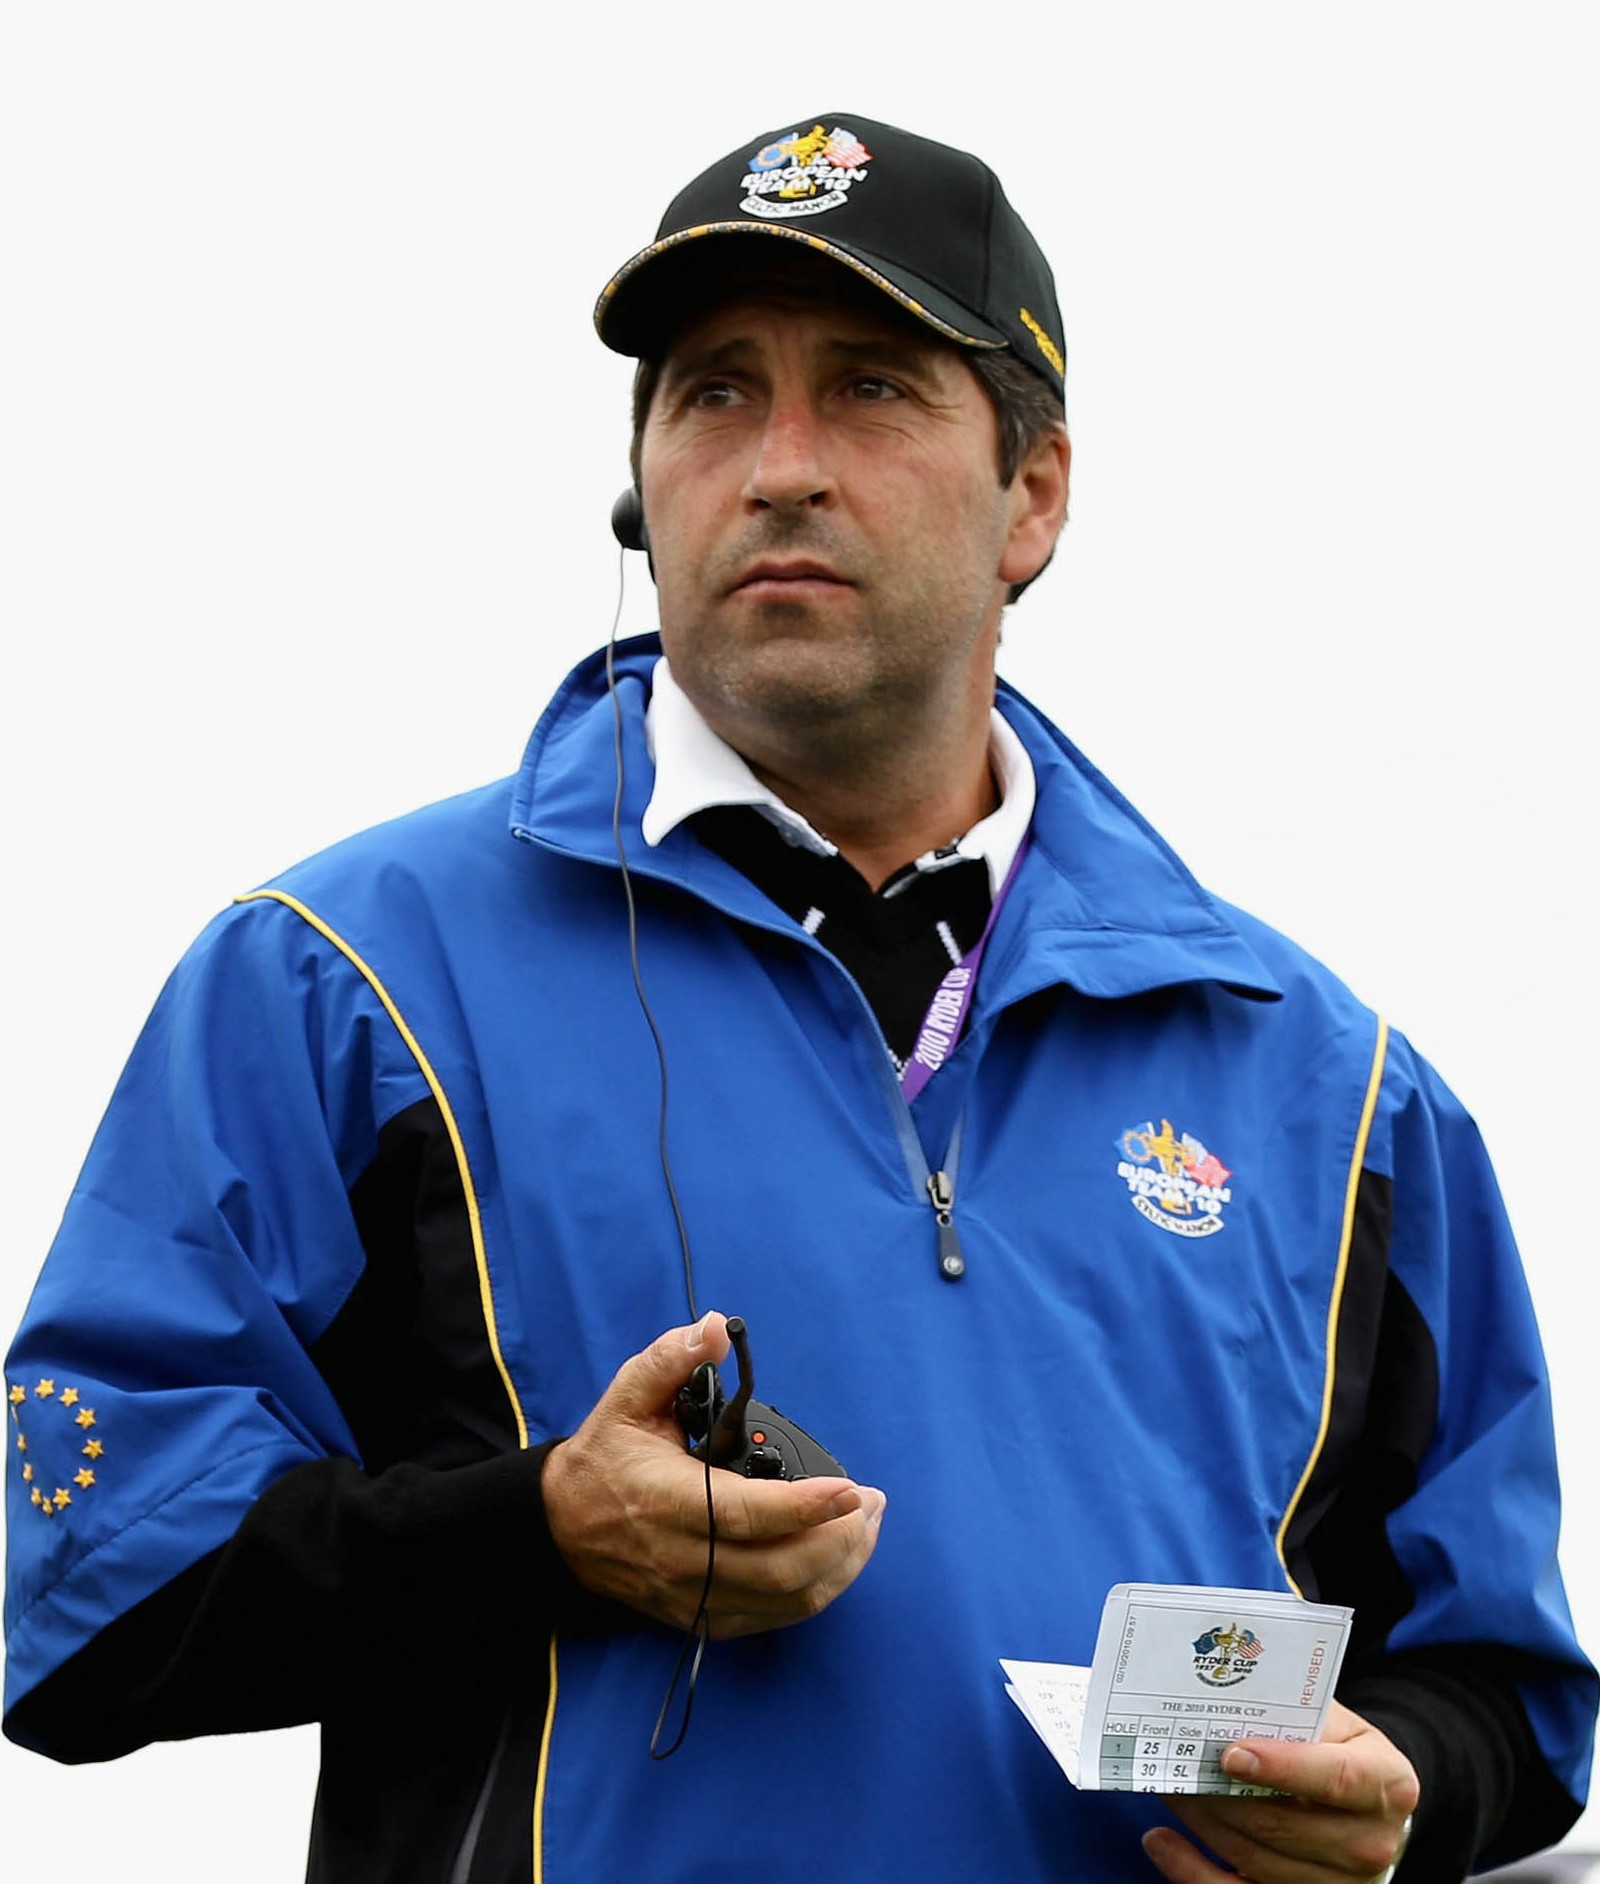 Foursome Matches-2010 Ryder Cup